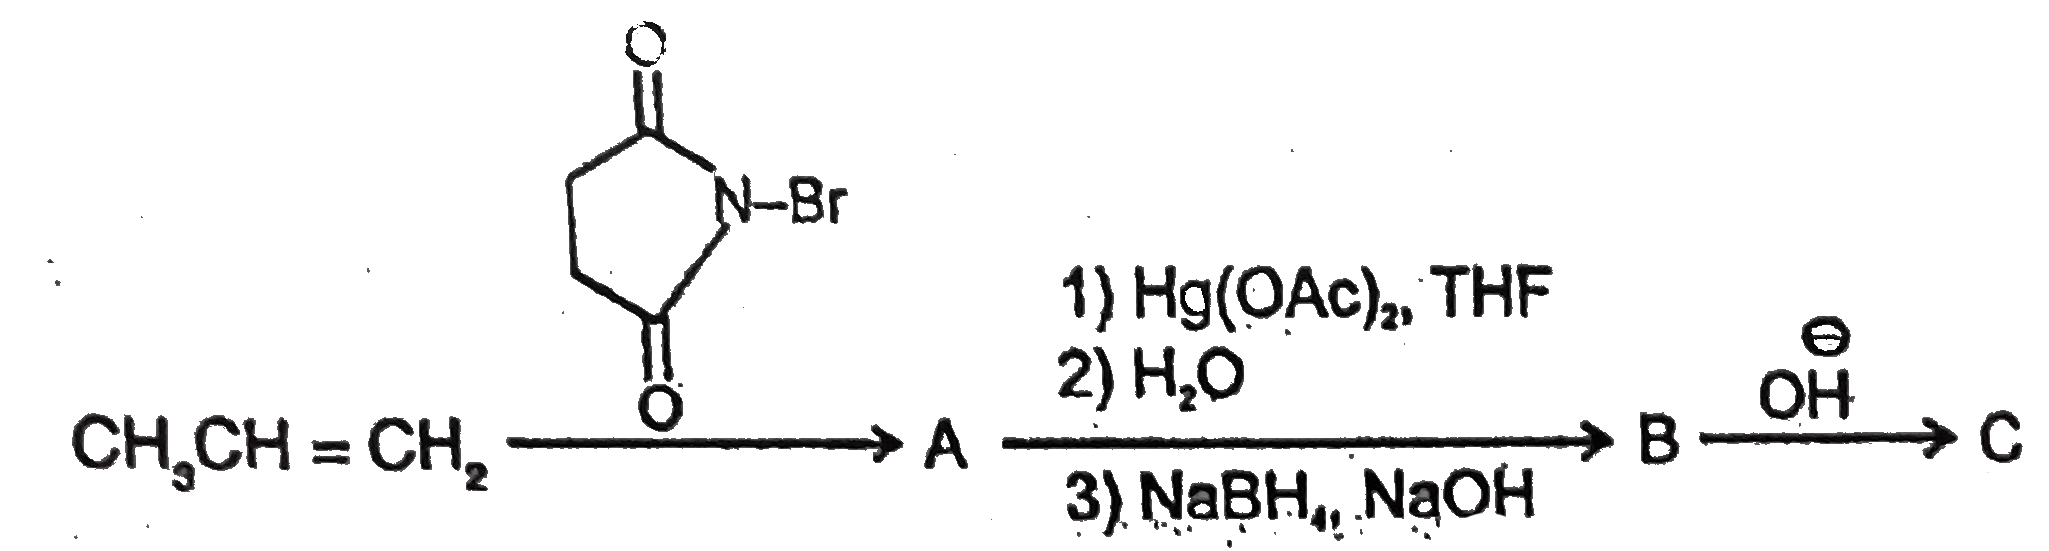 Addition of mercuric acetate in the presence of water is called as oxymercuration.The adduct obtained gives alcohol on reduction with NaBH4 in alkaline medium.This is known as demercuration.Oxymercuration demercuration allows Markownikoff's addition of H, OH without rearrangement.The net result is the addition of H2O Answer the following question :